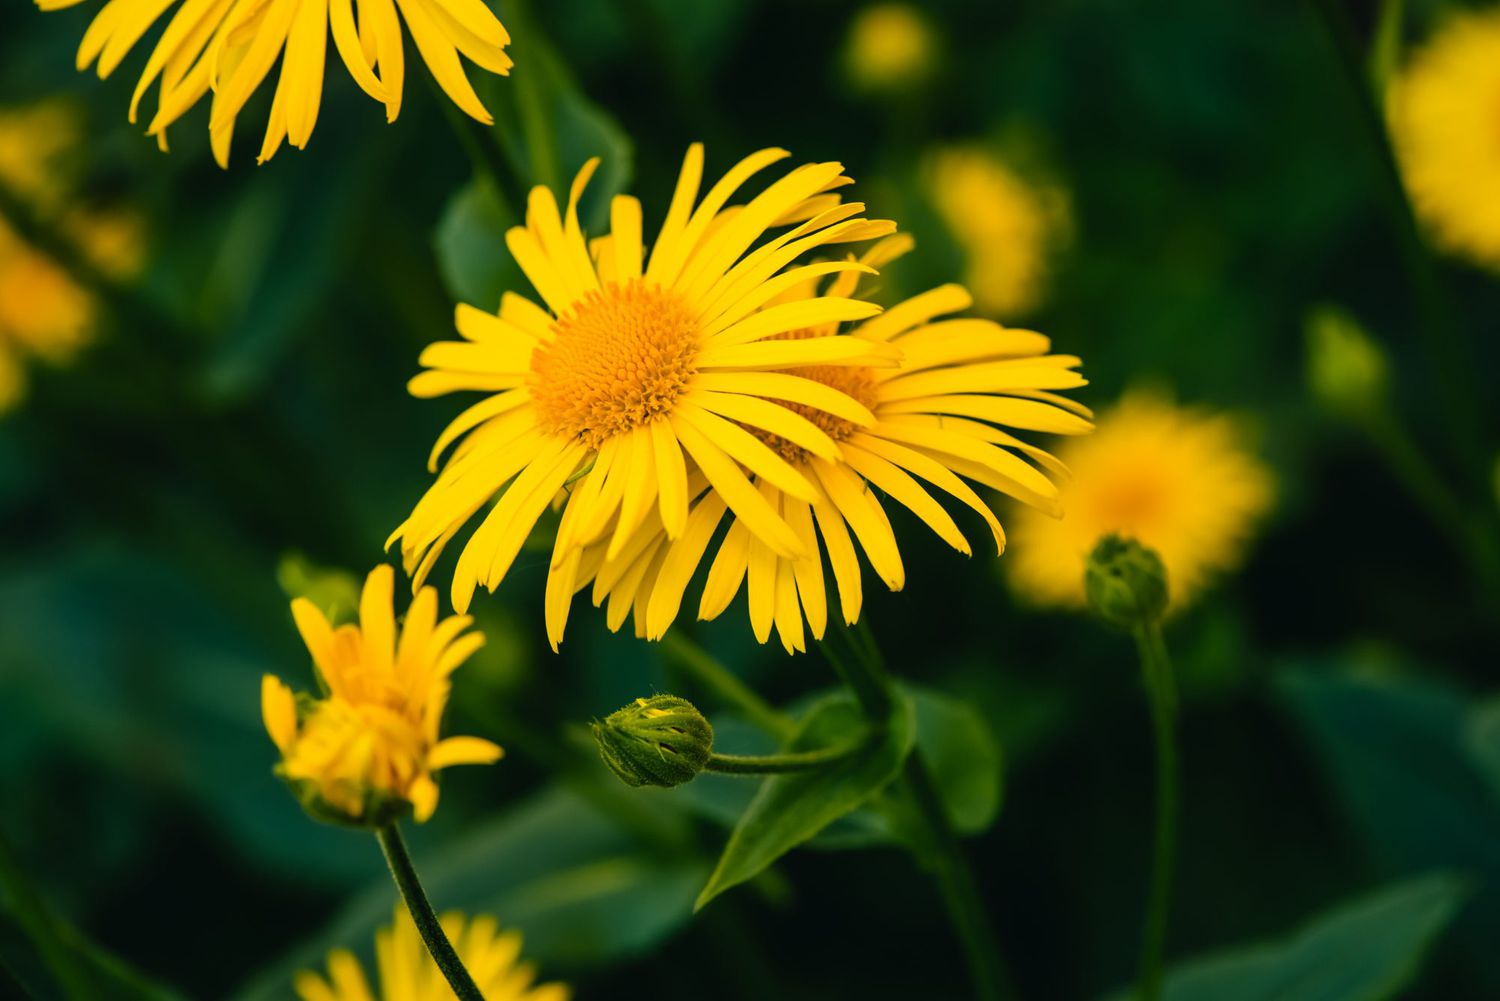 Two beautiful arnica grow in contact close up. Bright yellow fresh flowers with orange center on green background with copy space. Medicinal plants.